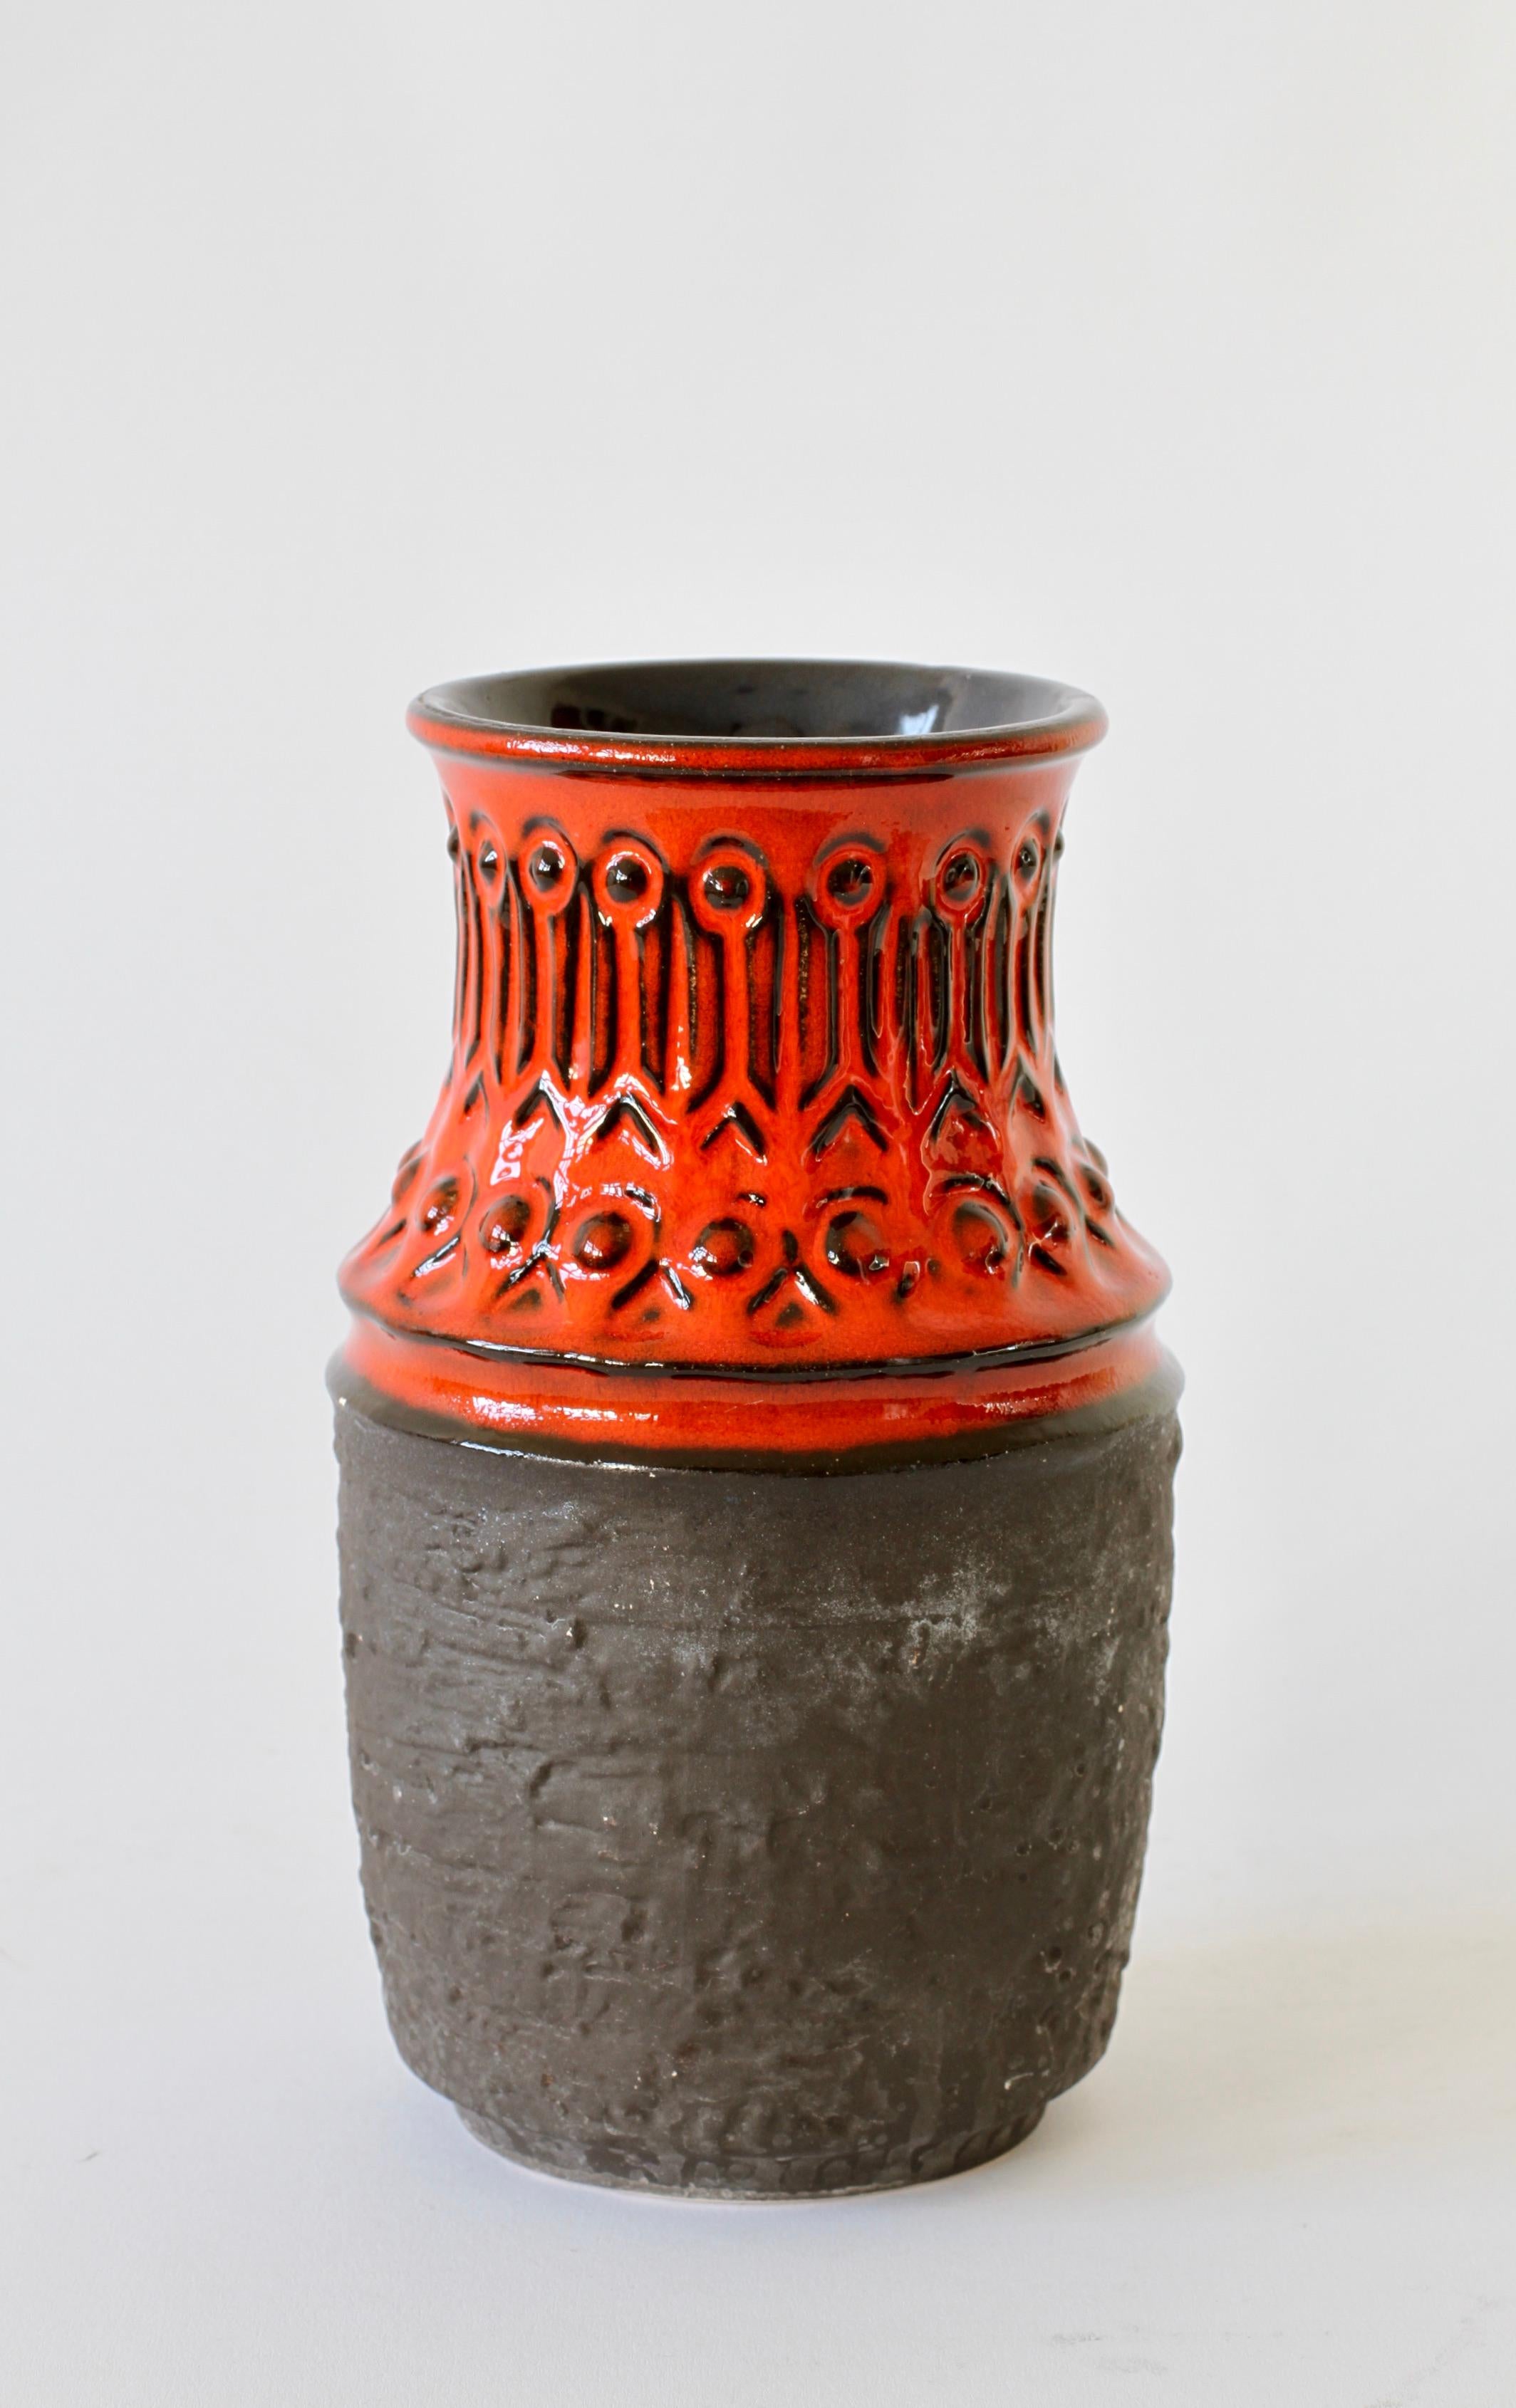 Molded Red and Black Vintage Midcentury West German Vase by Jasba Pottery, circa 1970 For Sale